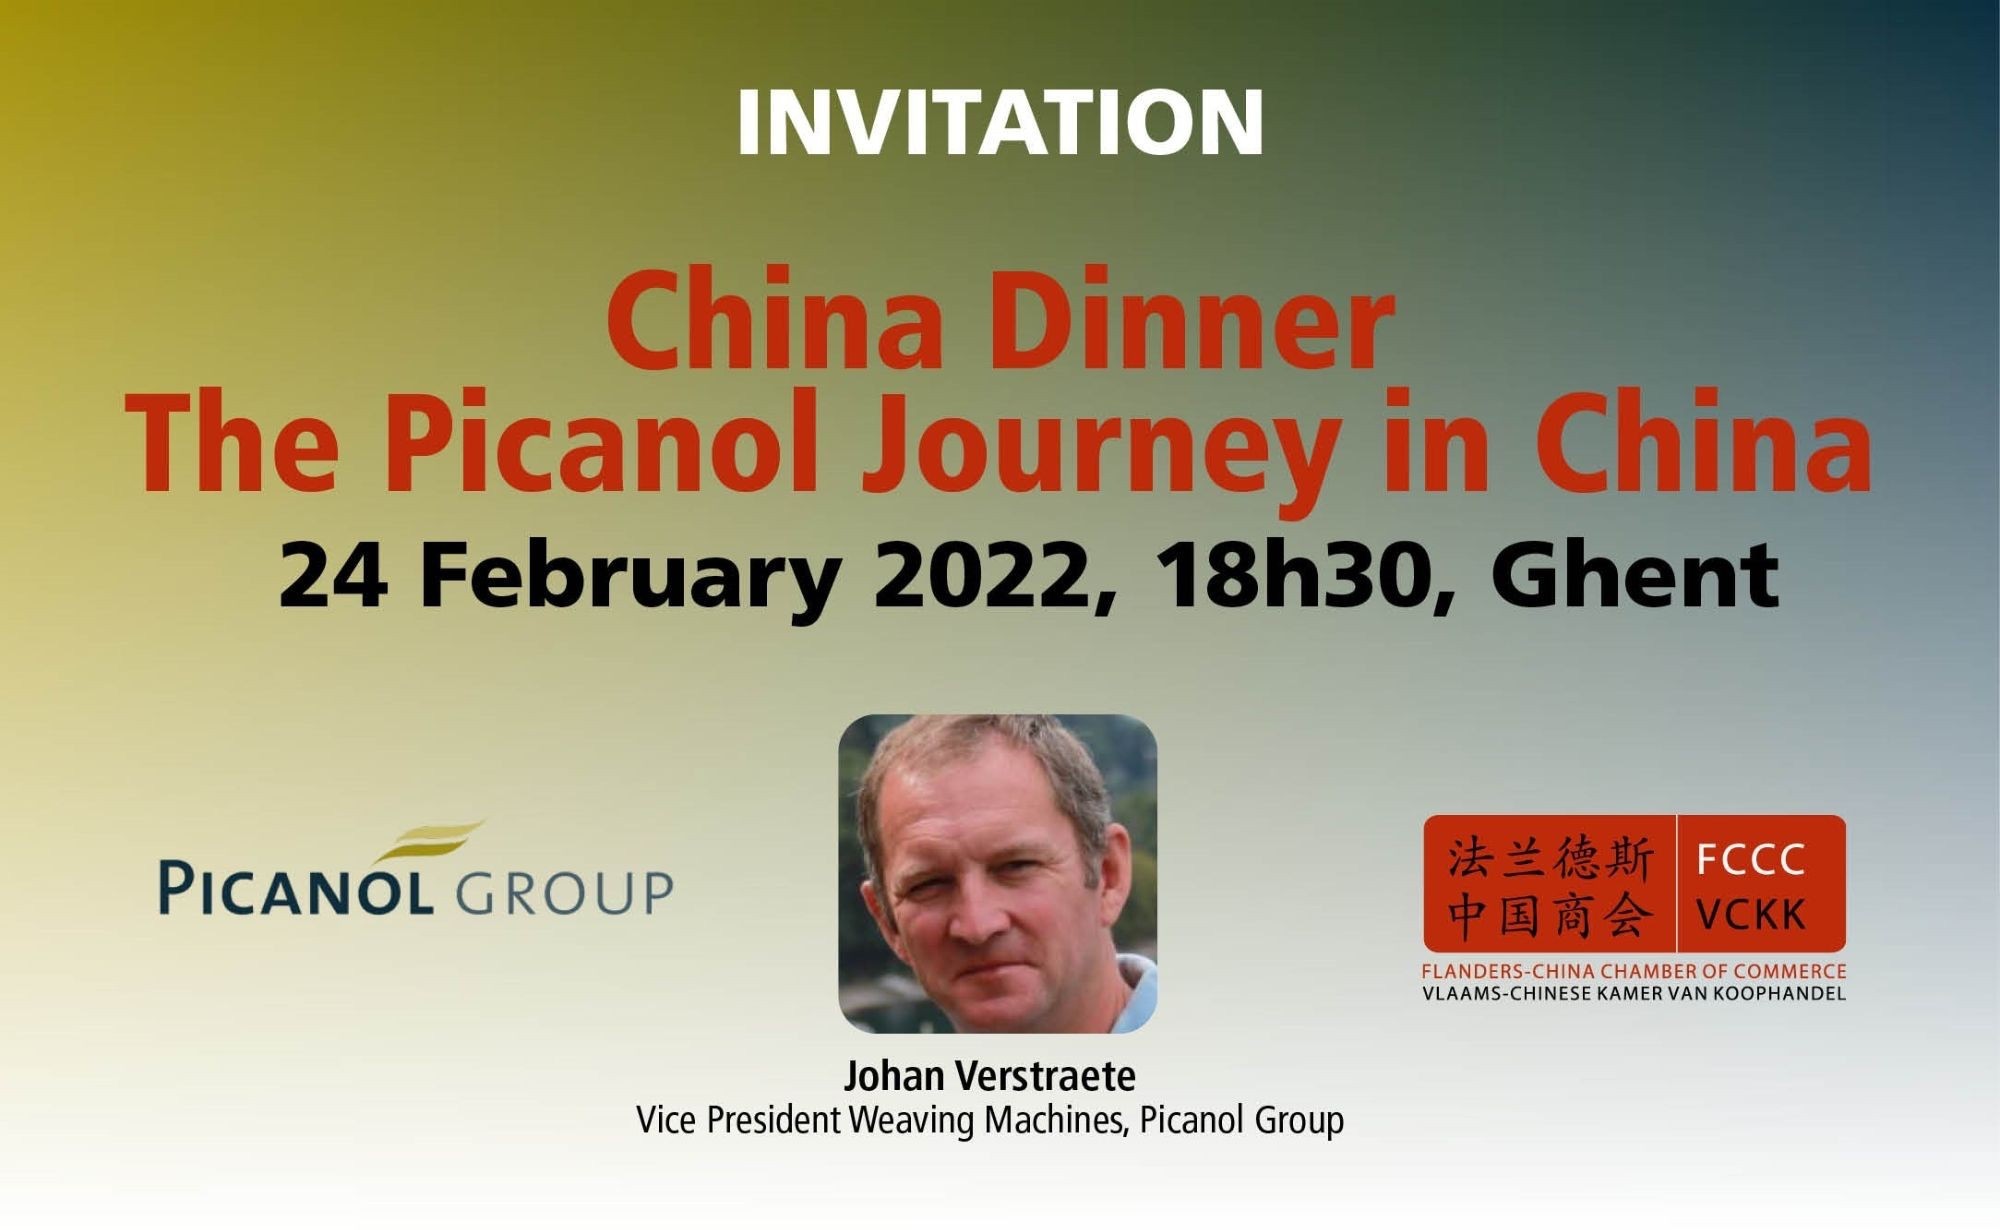 China Dinner: The Picanol Journey in China – 24 February 2022, 18h30, Ghent